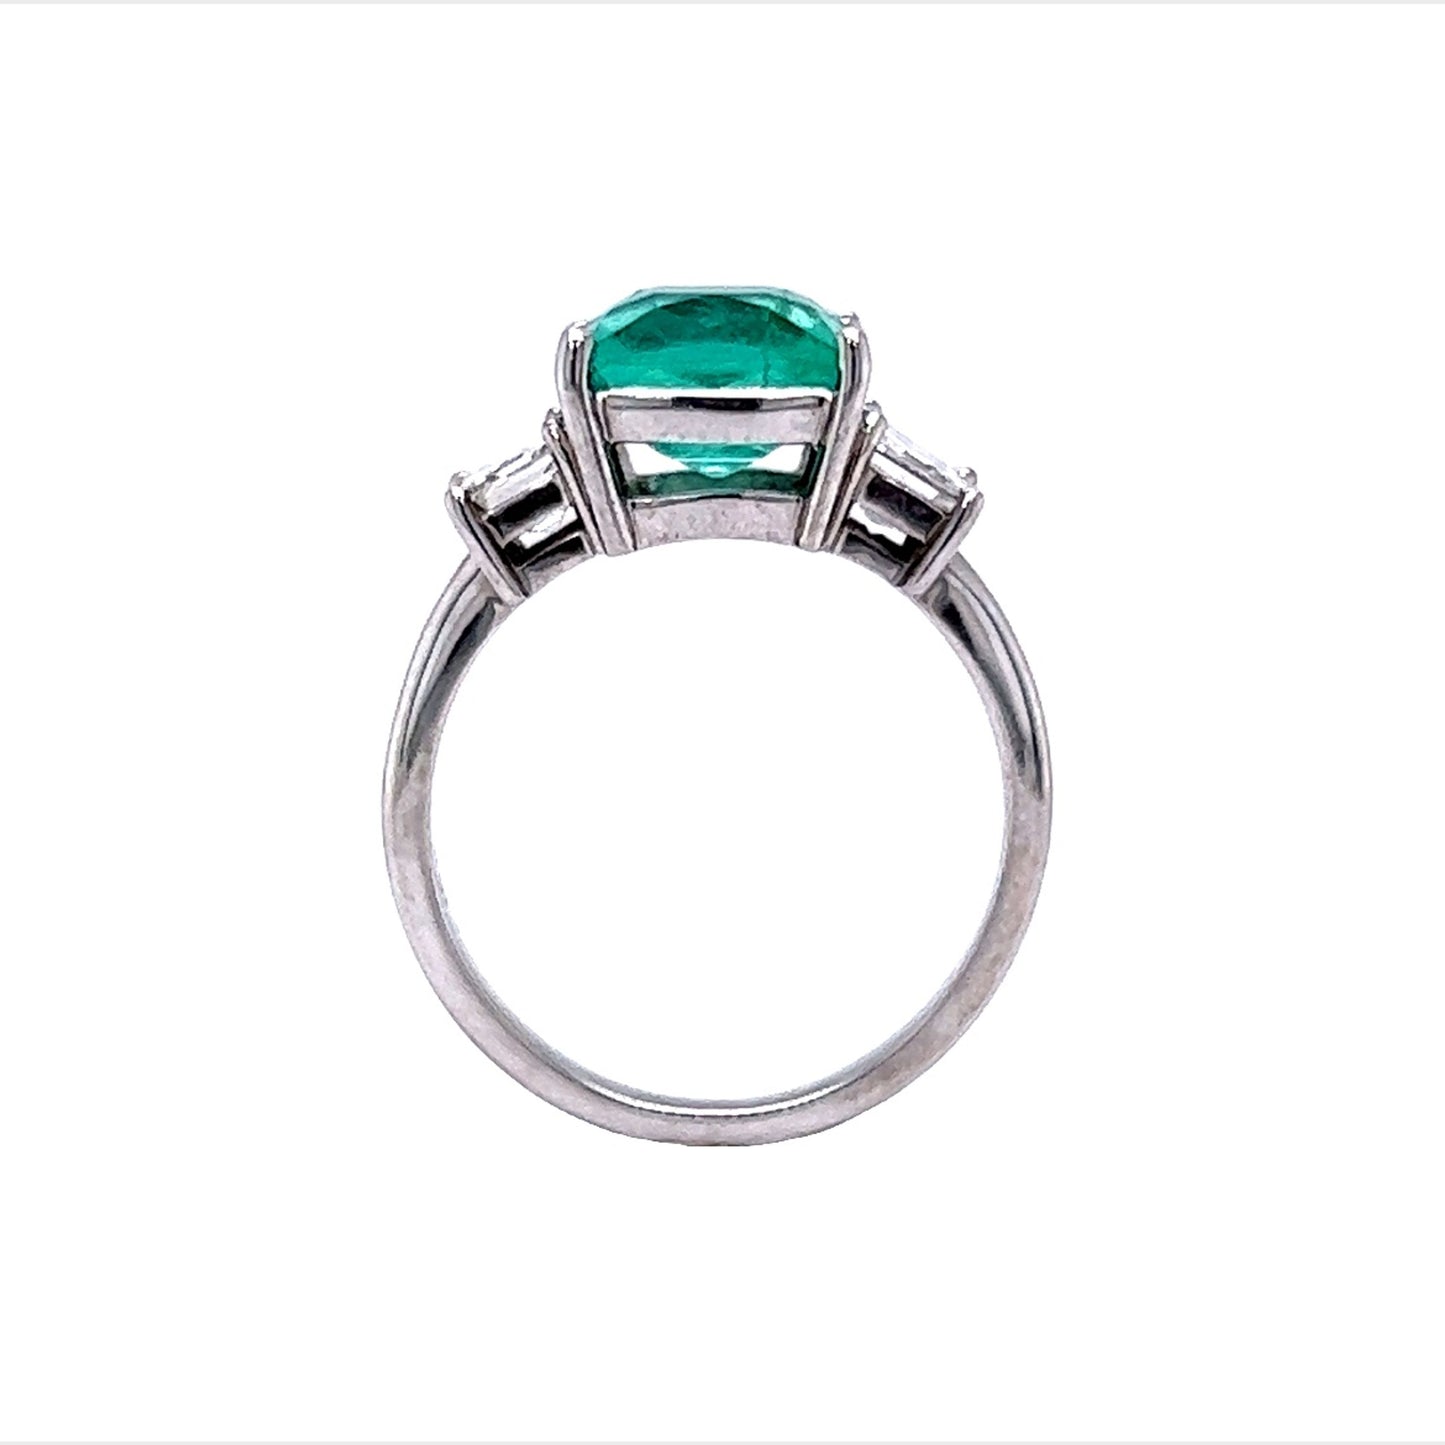 Emerald Cocktail Ring in 18k White Gold